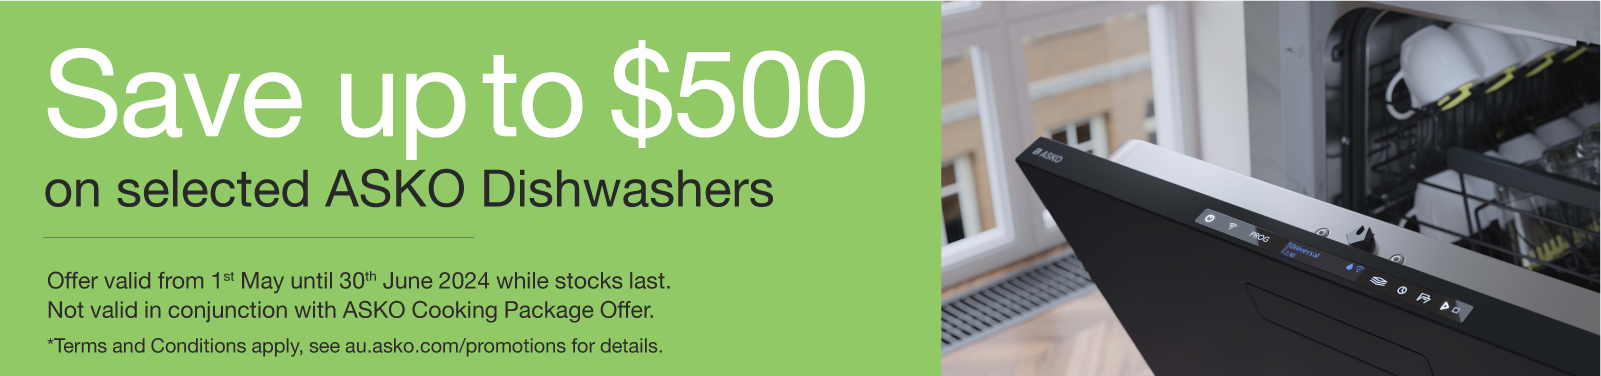 Save Up To $500 On Selected ASKO Dishwashers at Retravision